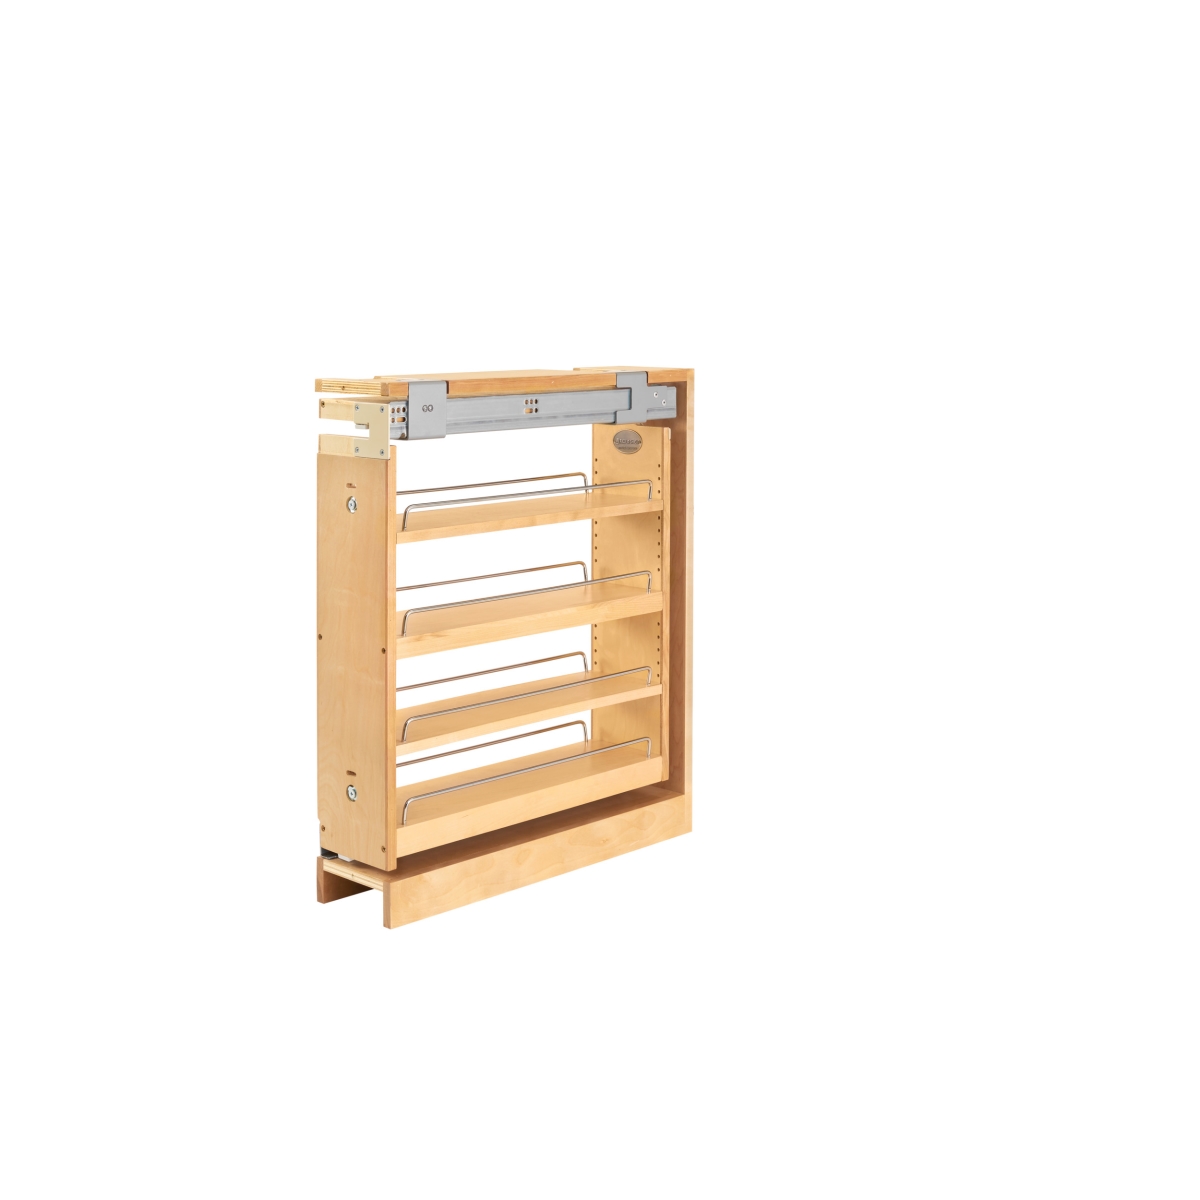 Base Cabinet Pullout Organizer With Top Slide Sink & Base Accessories, Natural Maple - 27.31 X 6 X 23 In.